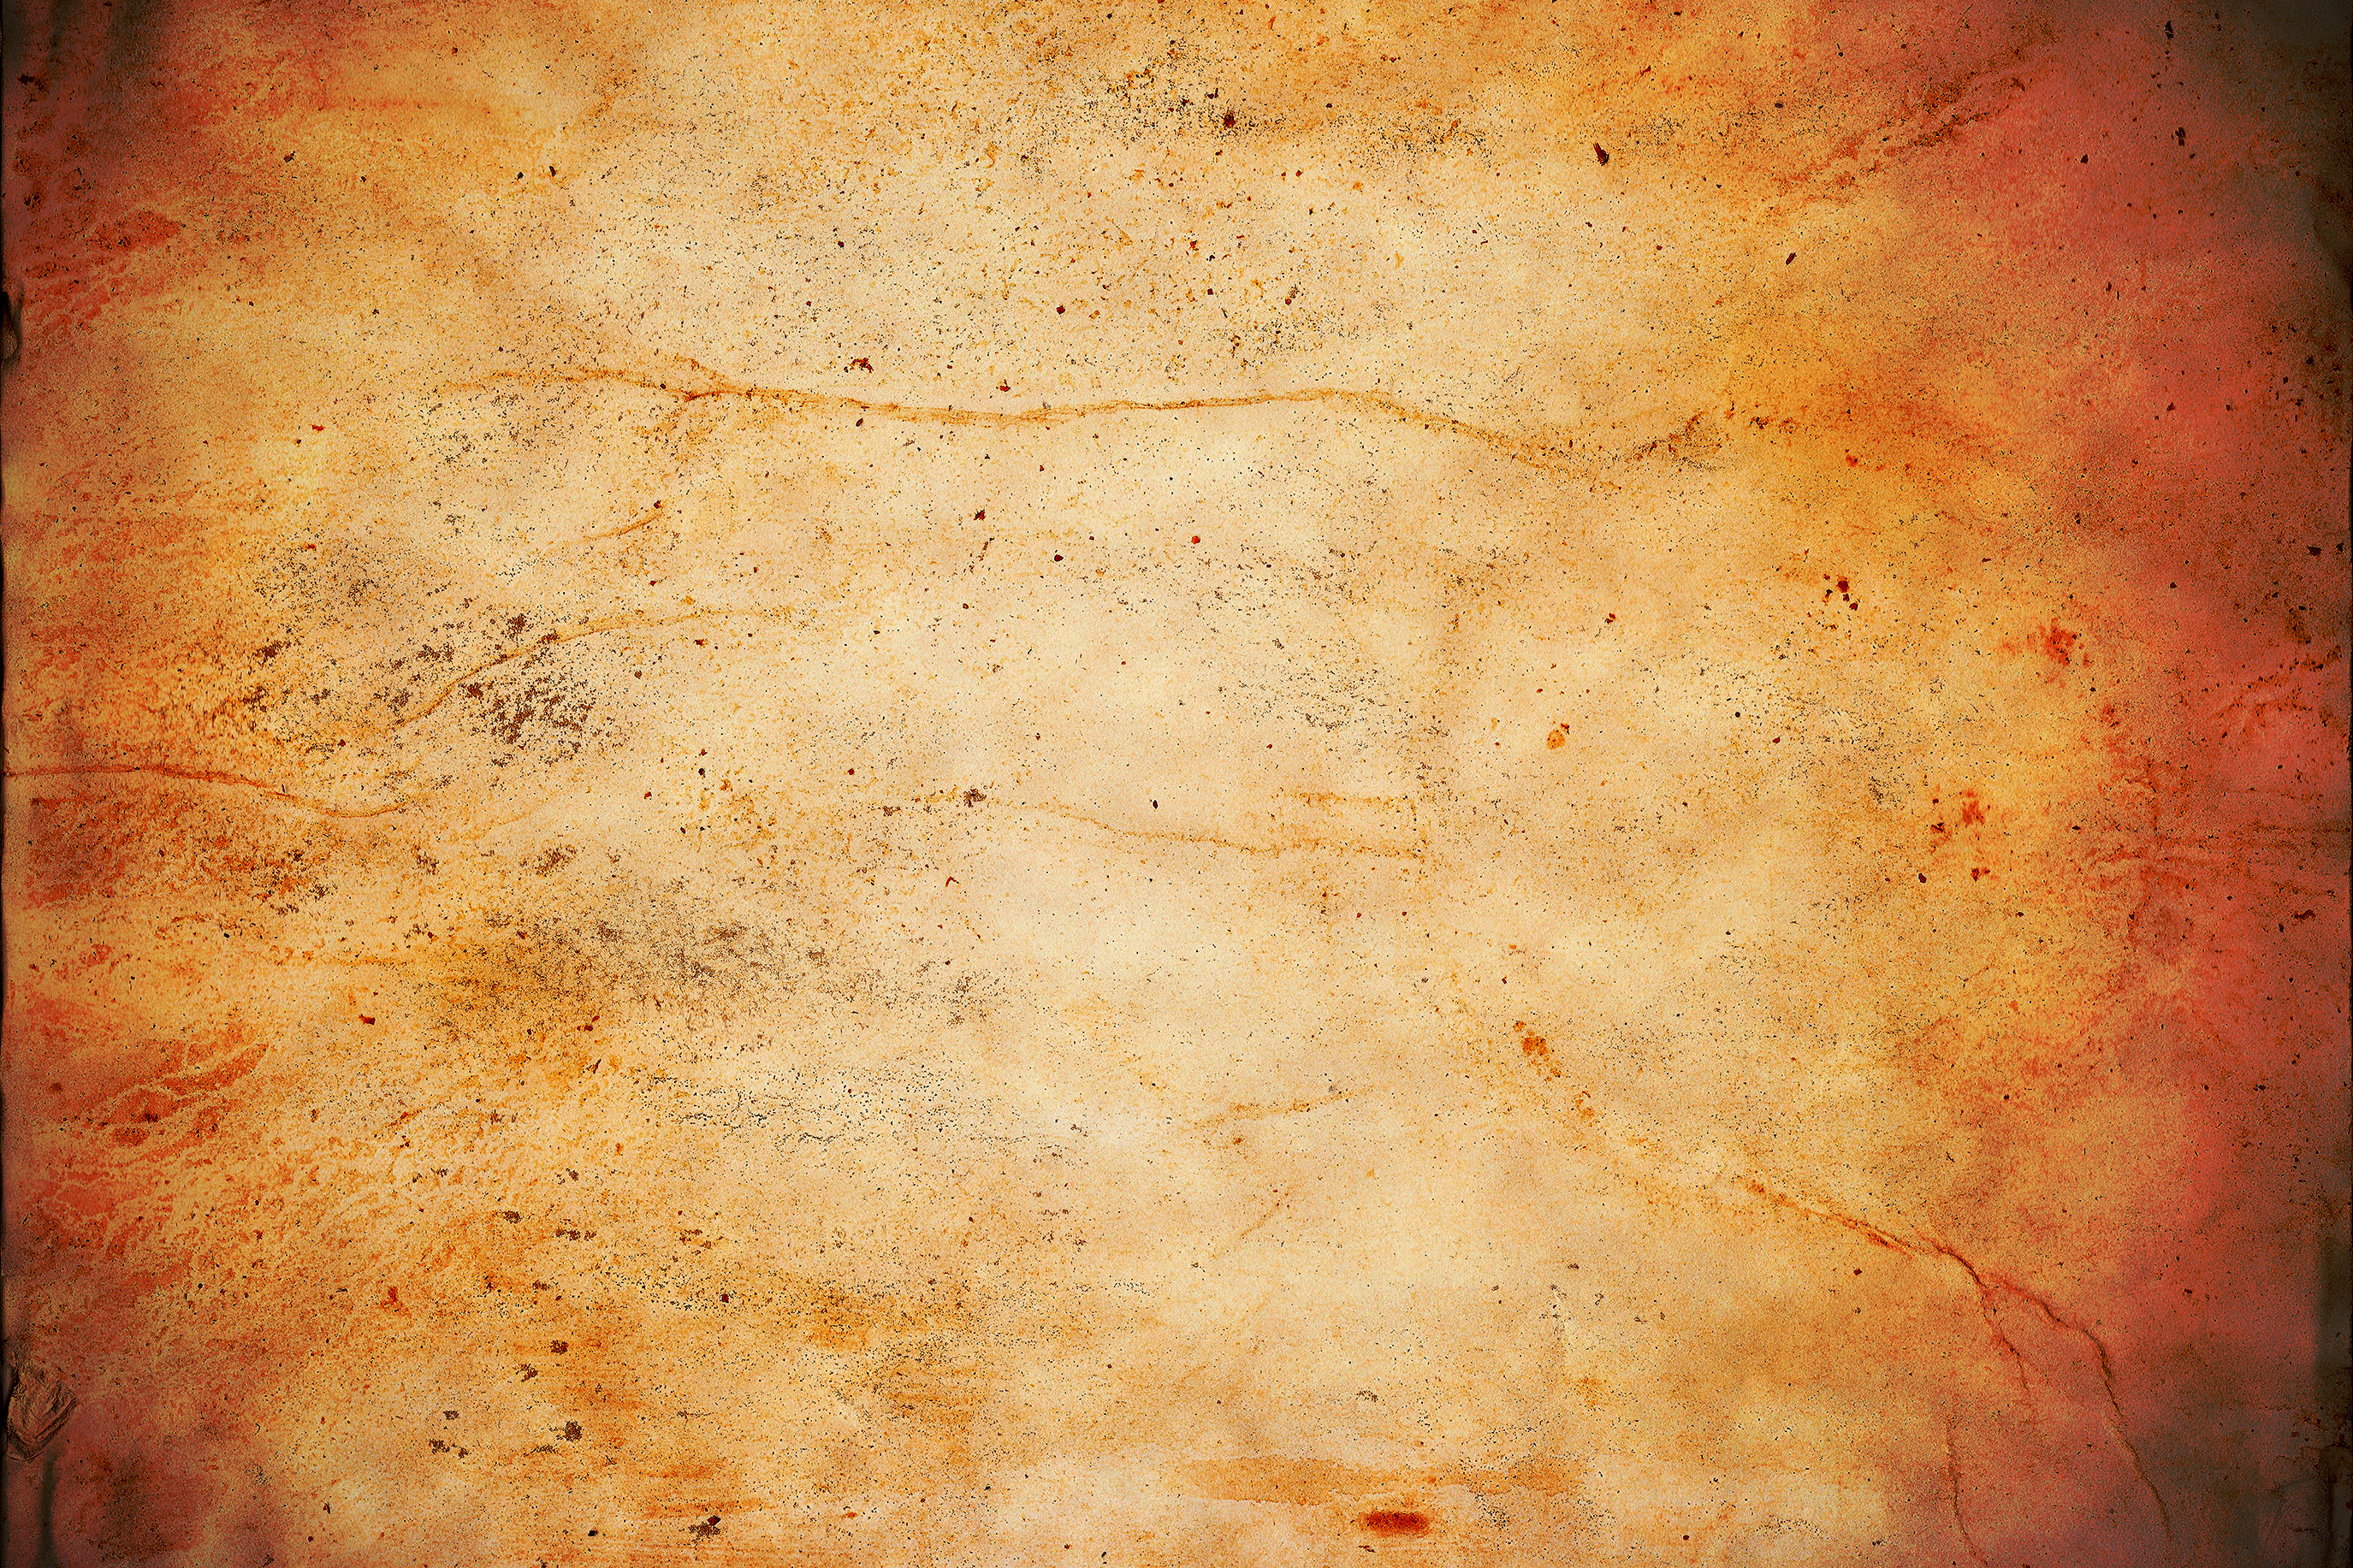 Here Are Five Background Texture Image Offered By D Audette